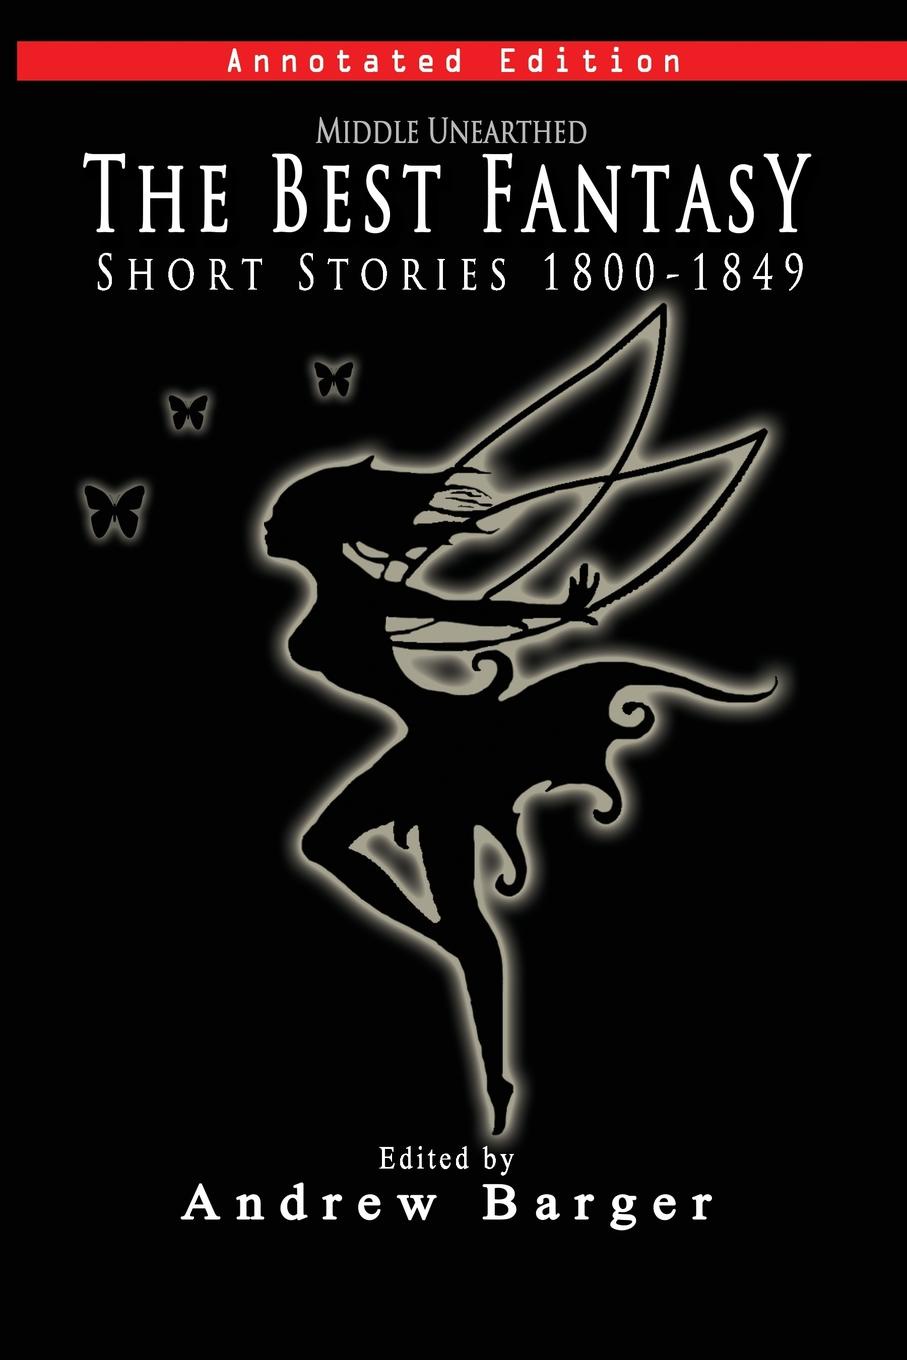 Middle Unearthed. The Best Fantasy Short Stories 1800-1849